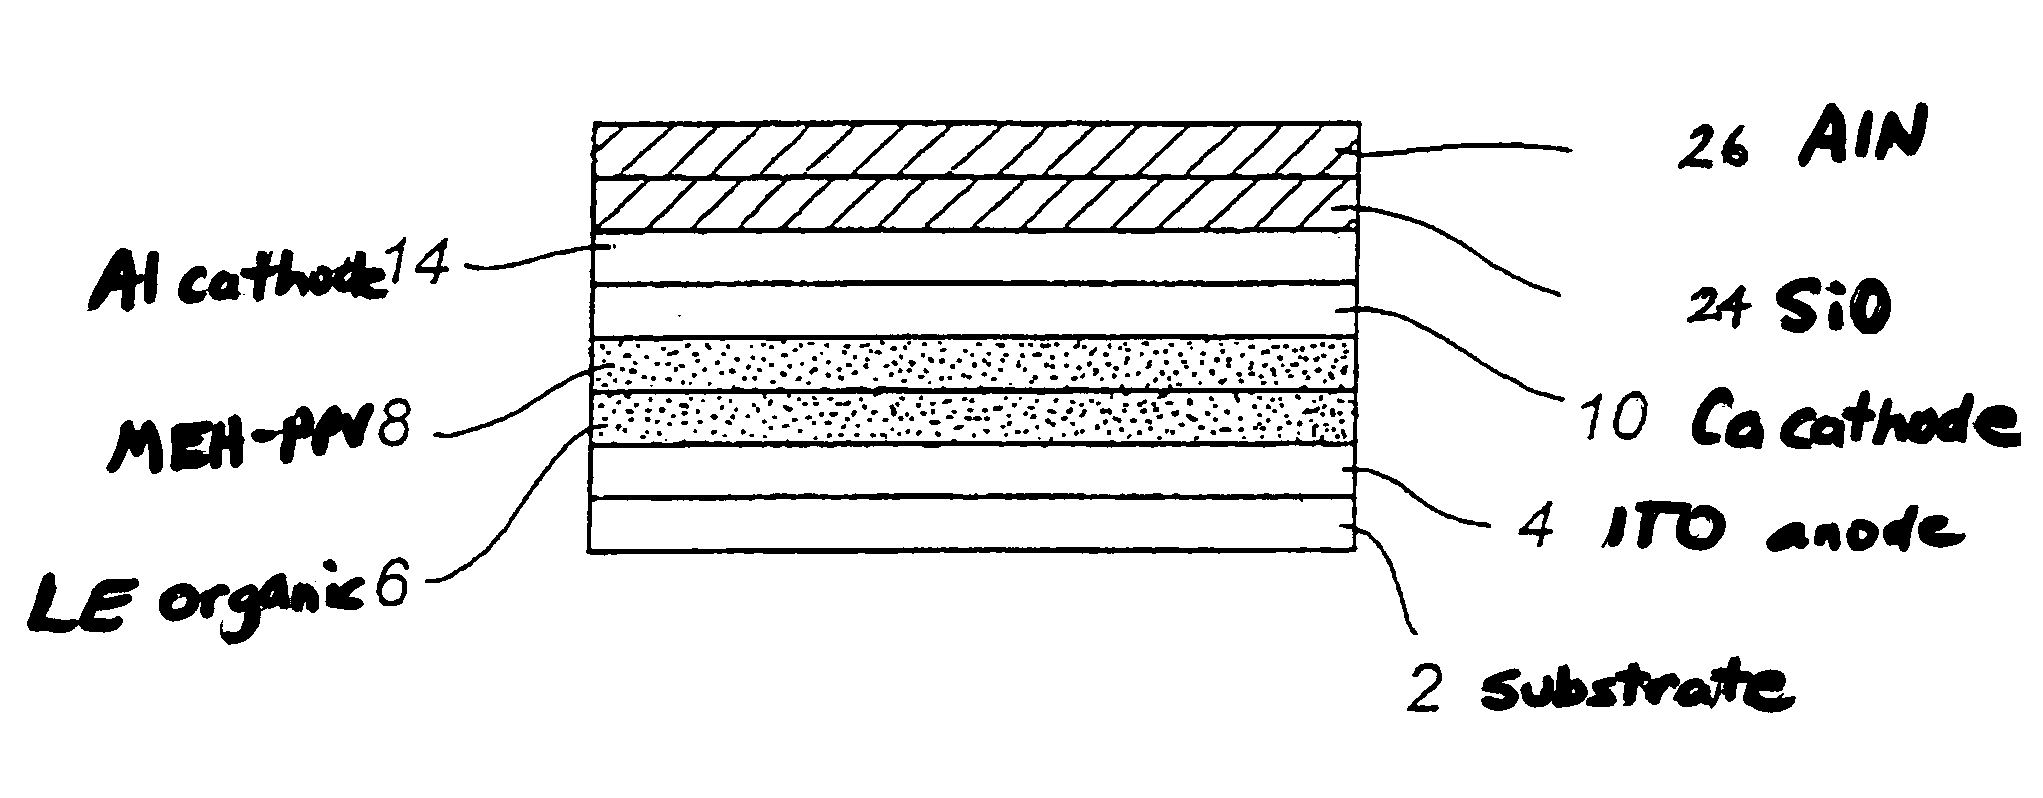 Organic light-emitting devices including specific barrier layers